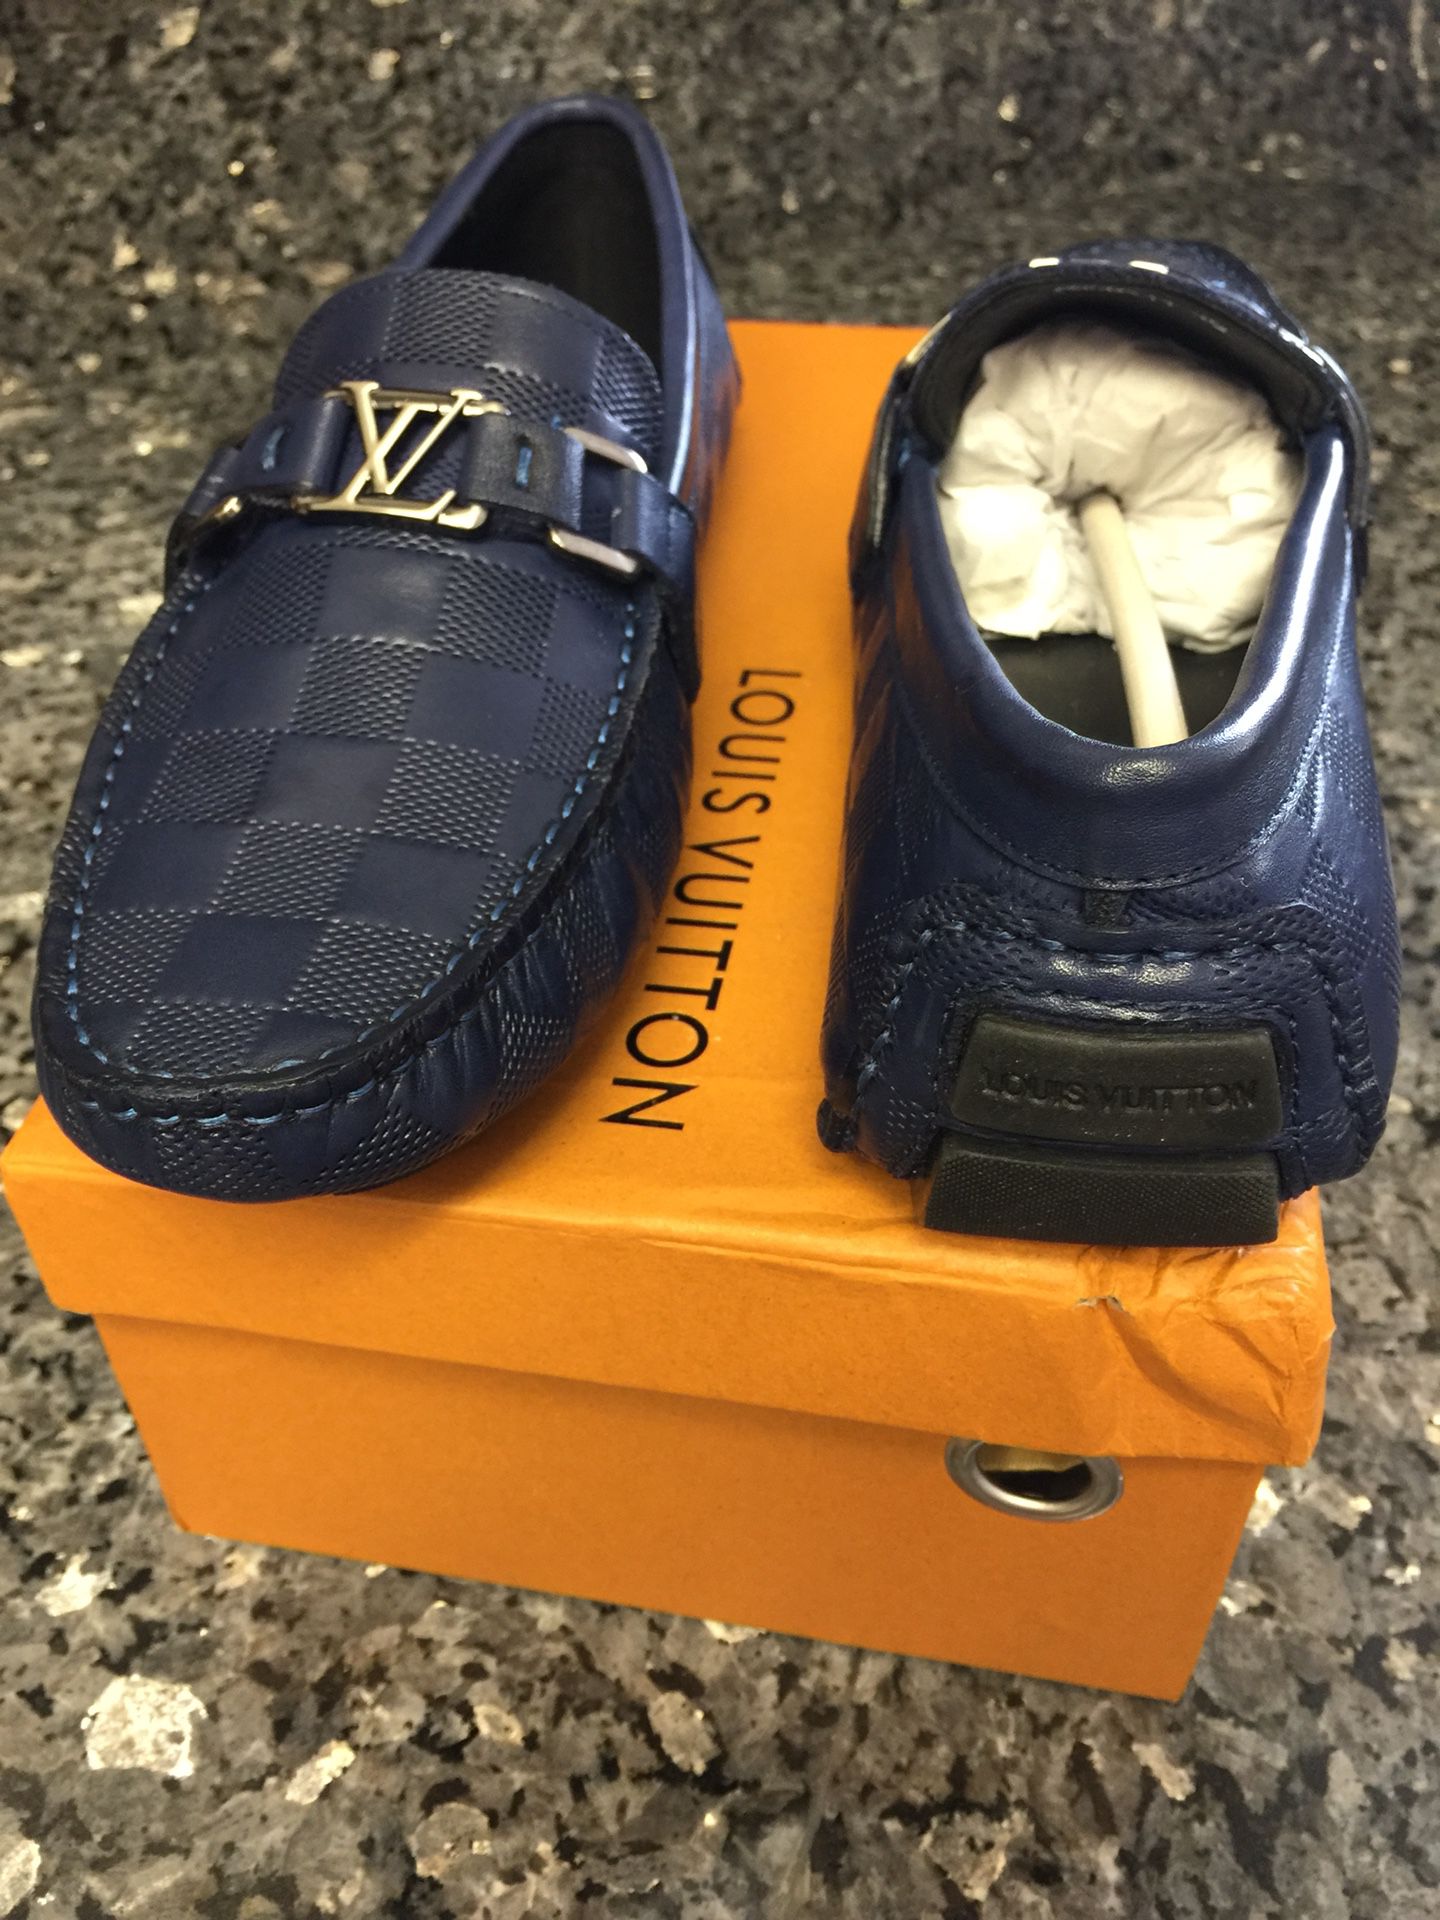 Louis Vuitton Navy Blue Leather Major Loafers Size 43.5 - ShopStyle